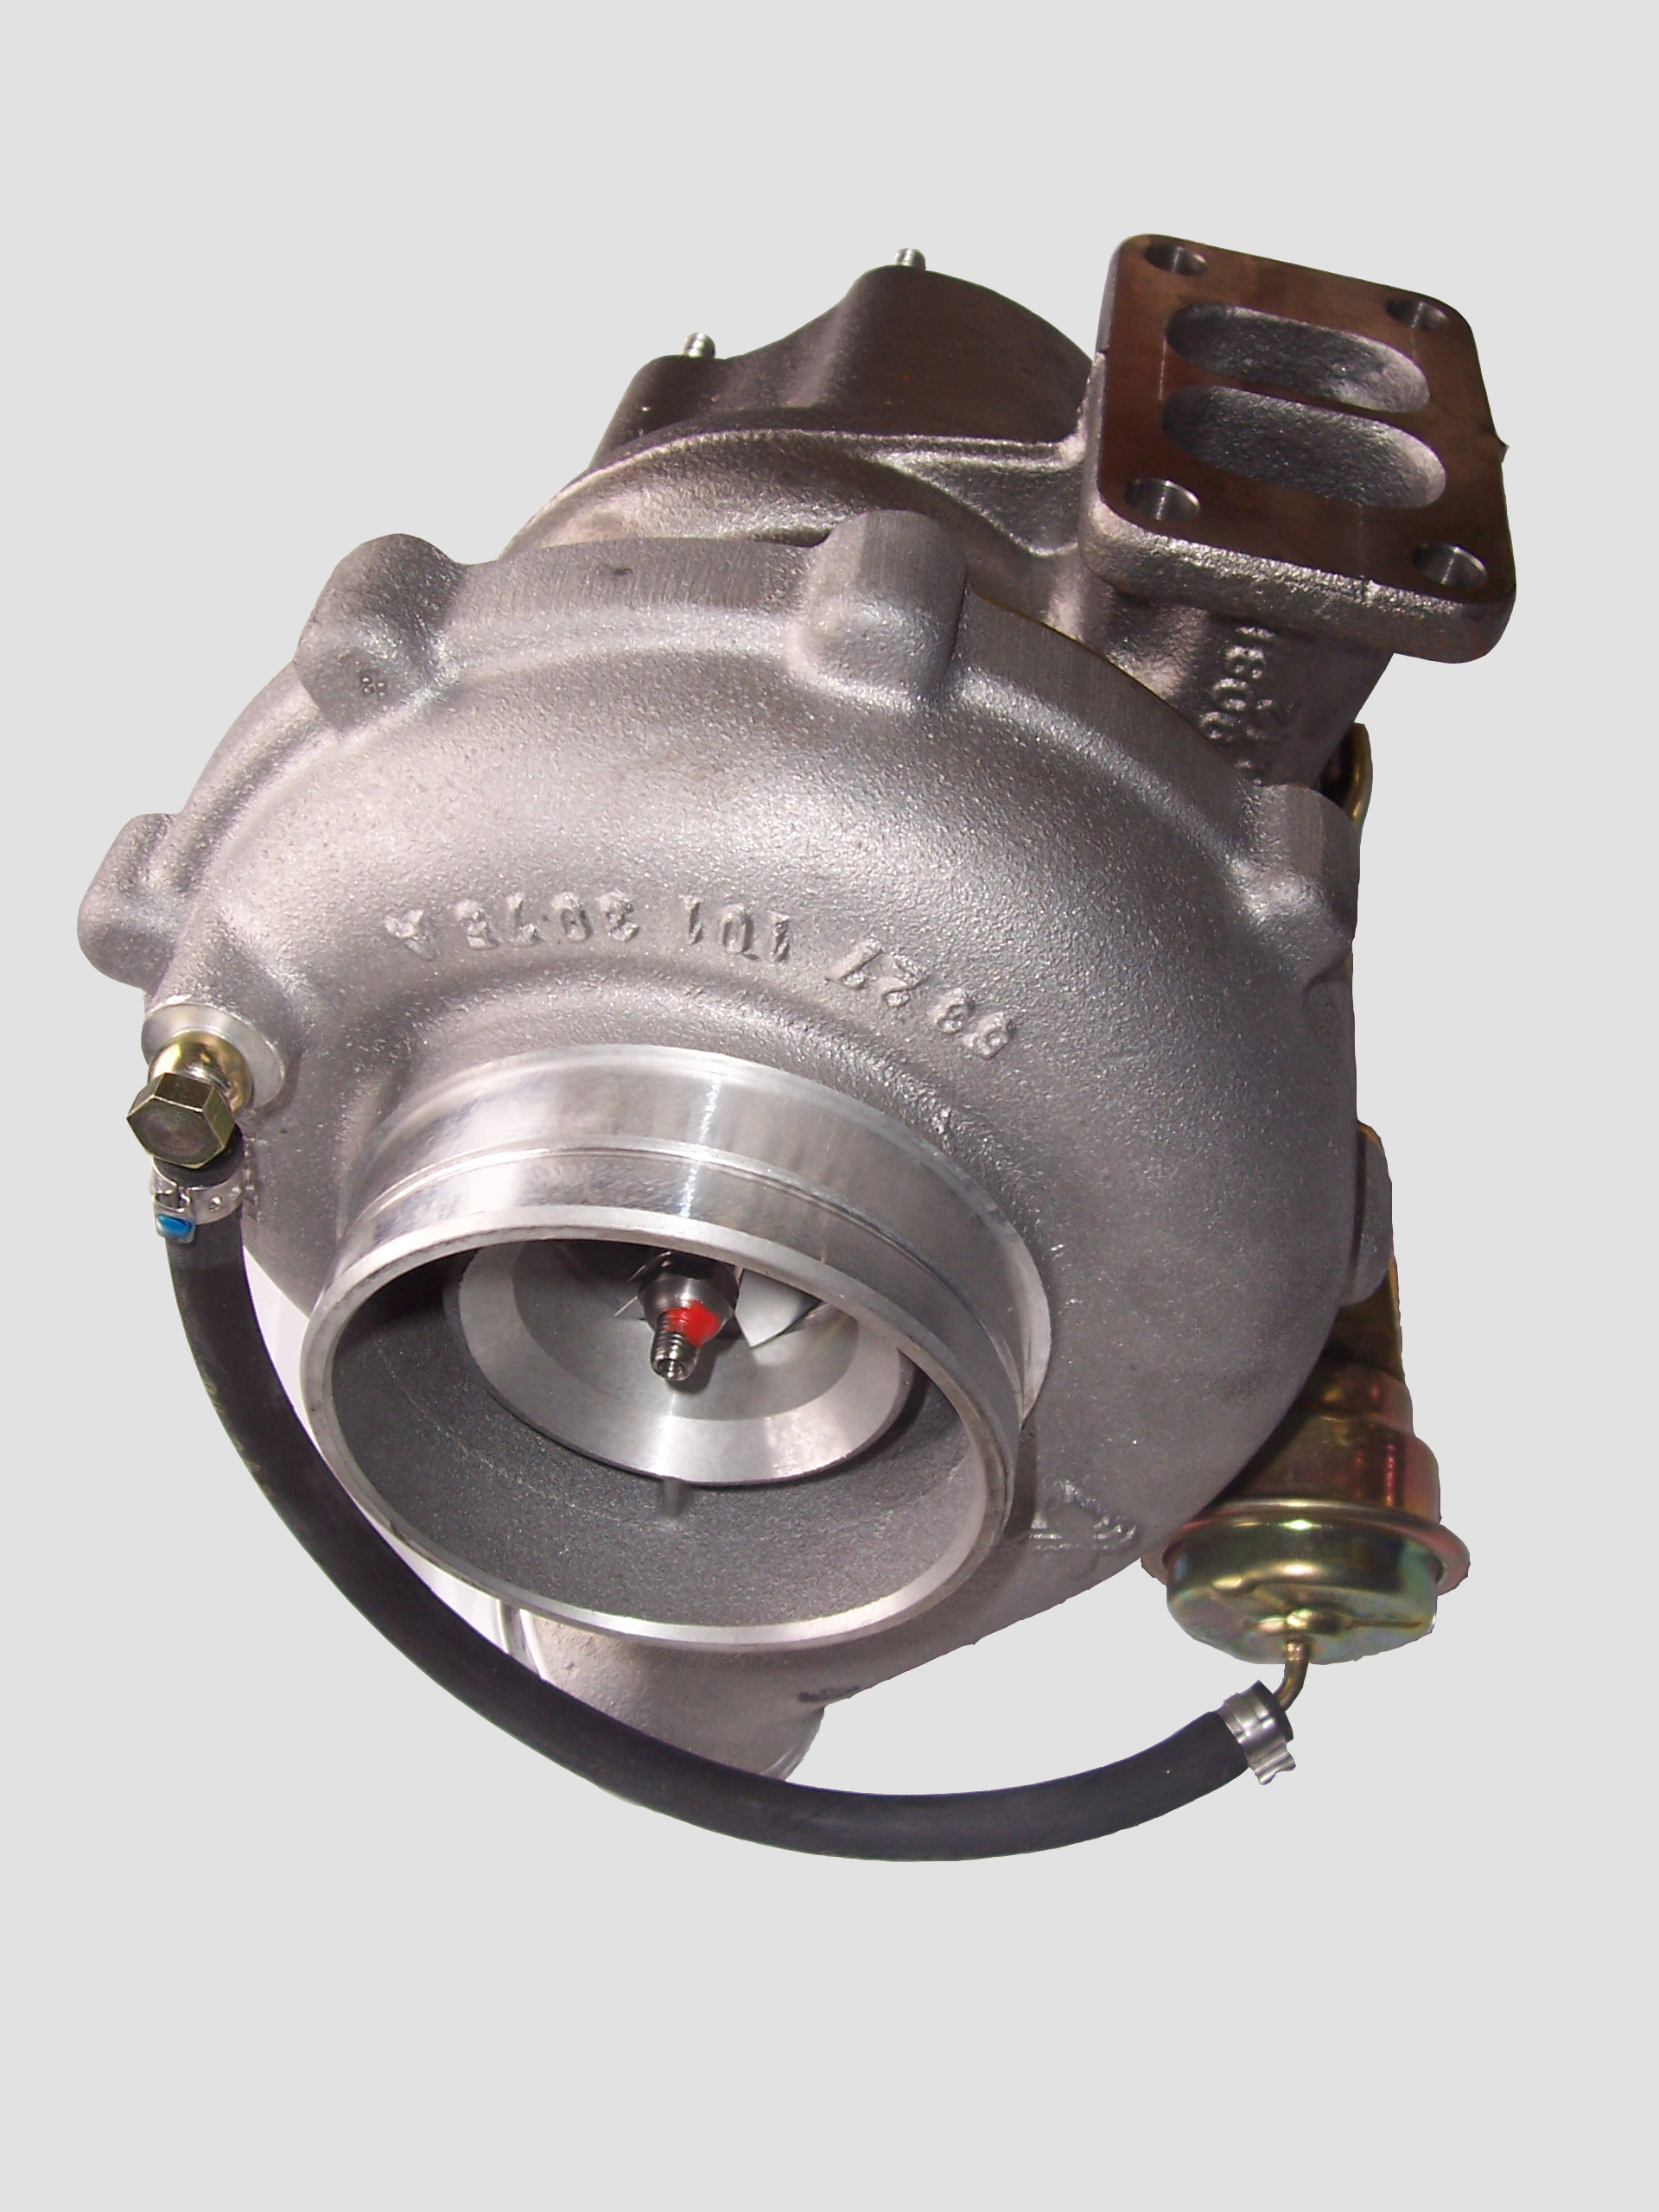 A Turbocharger like the one simulated in REP